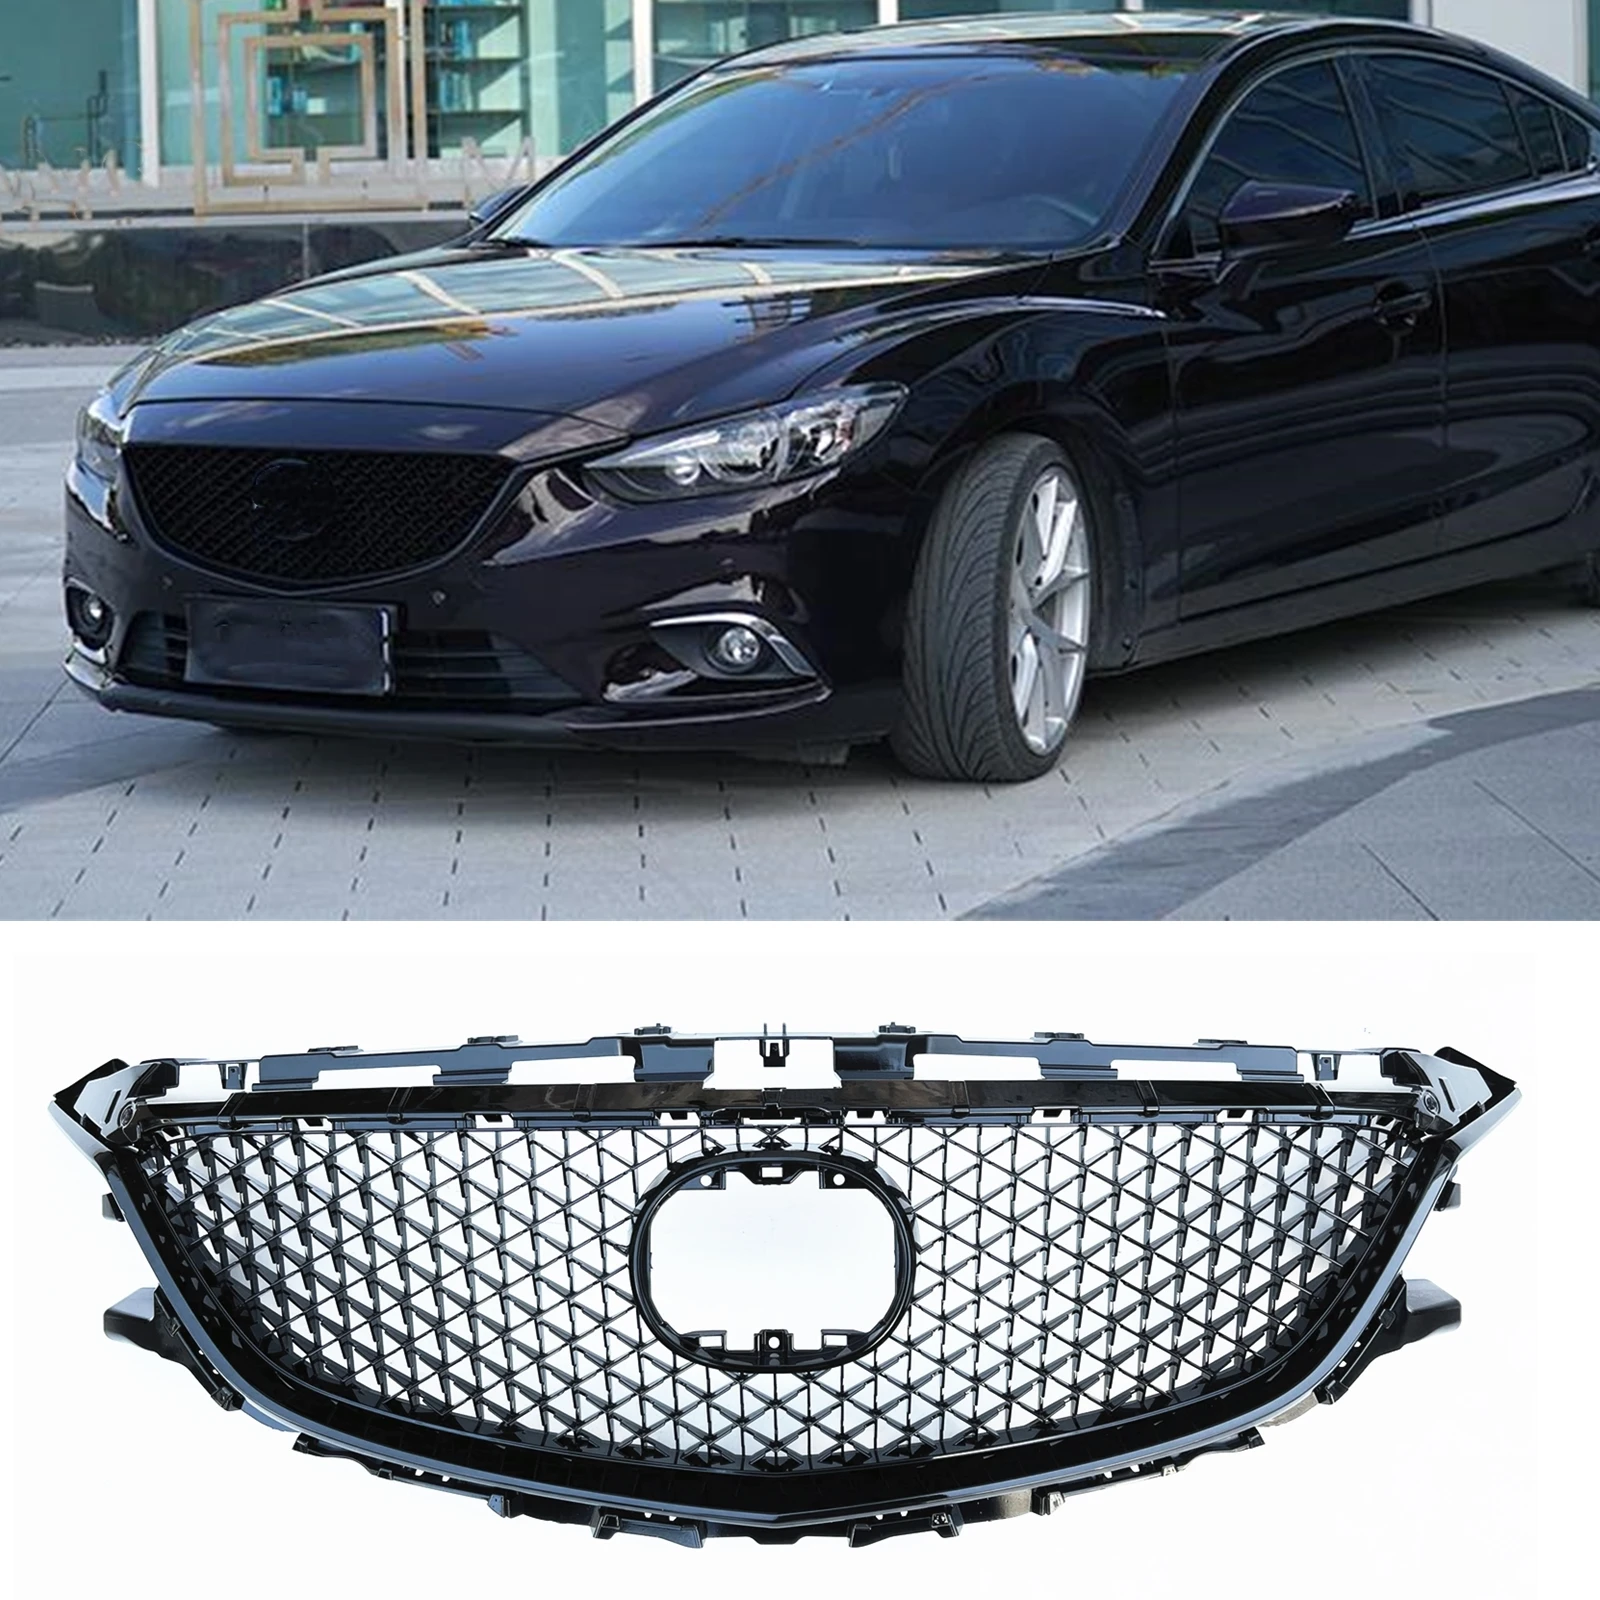 

For Mazda 6 2014-2016 Honeycomb Style Racing Grills Front Grille Mazda6 Upper Bumper Intake Hood Cover Mesh Car Body Kit Grid